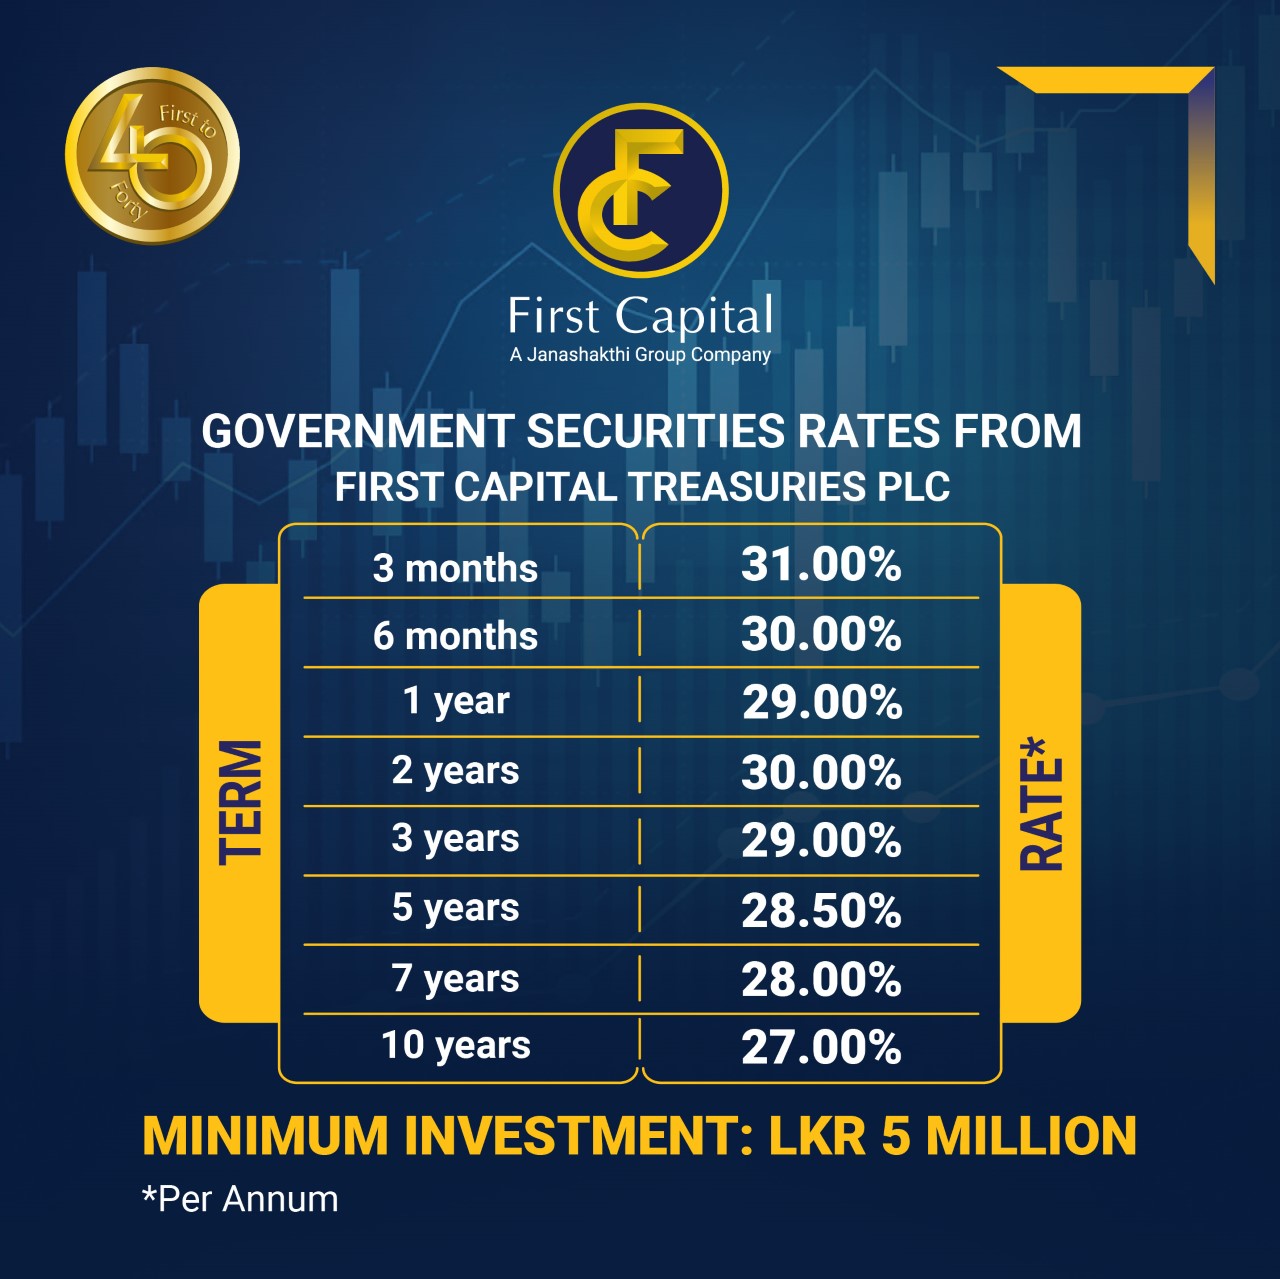 Invest in Government Securities with First Capital Treasuries PLC